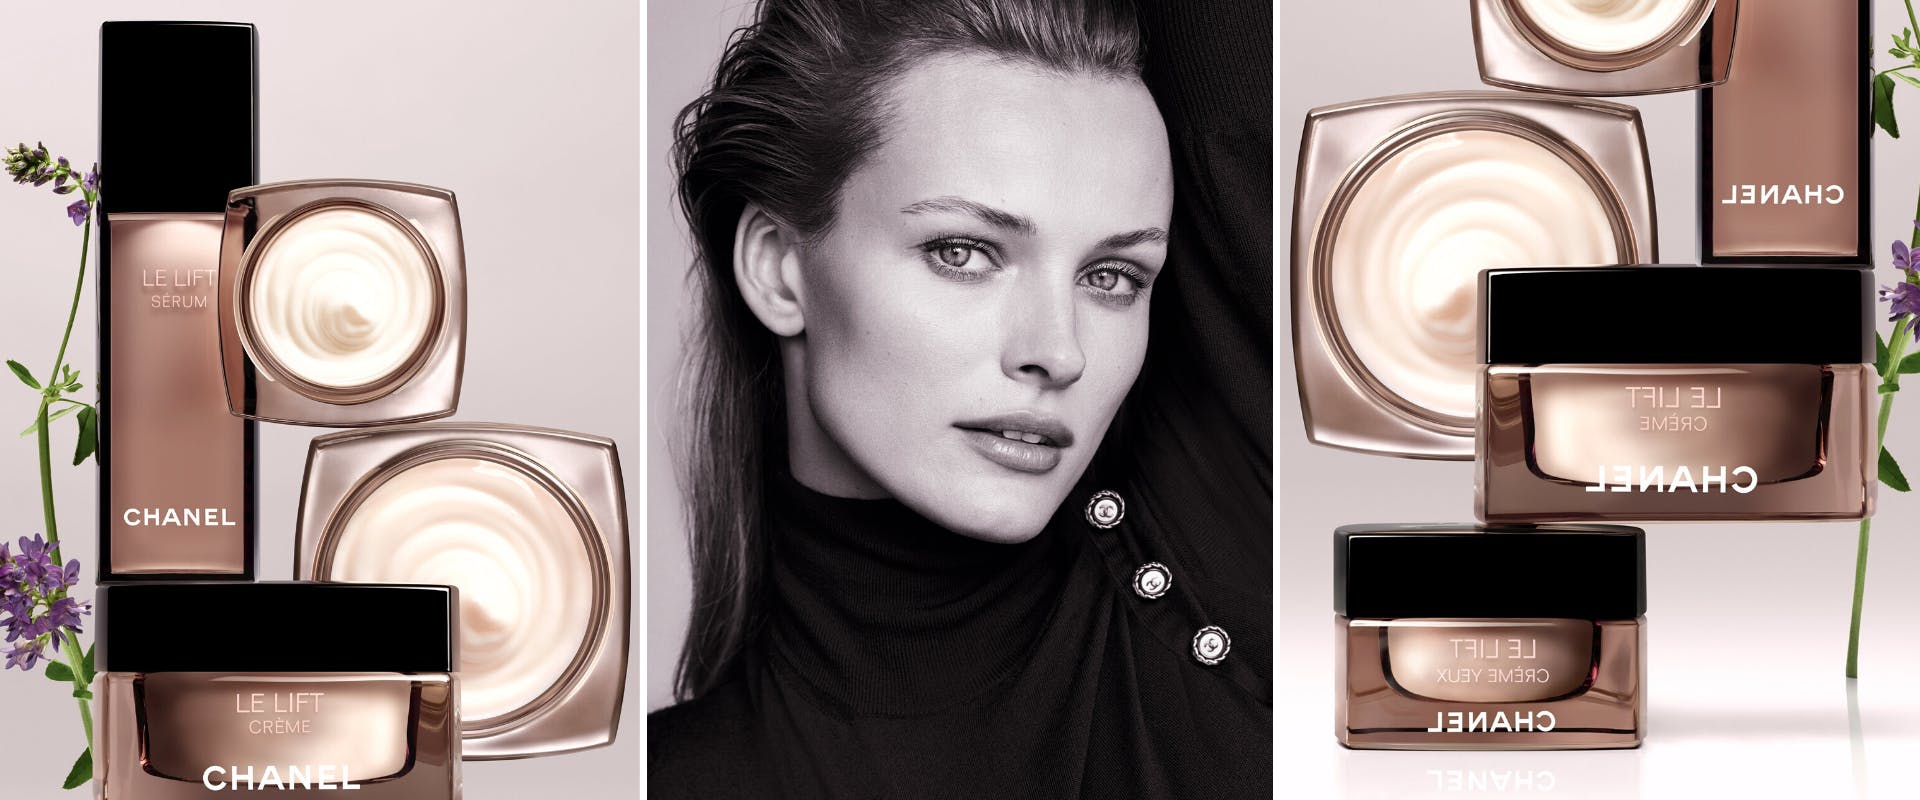 Chanel invents Le Lift, the line that transforms the skin